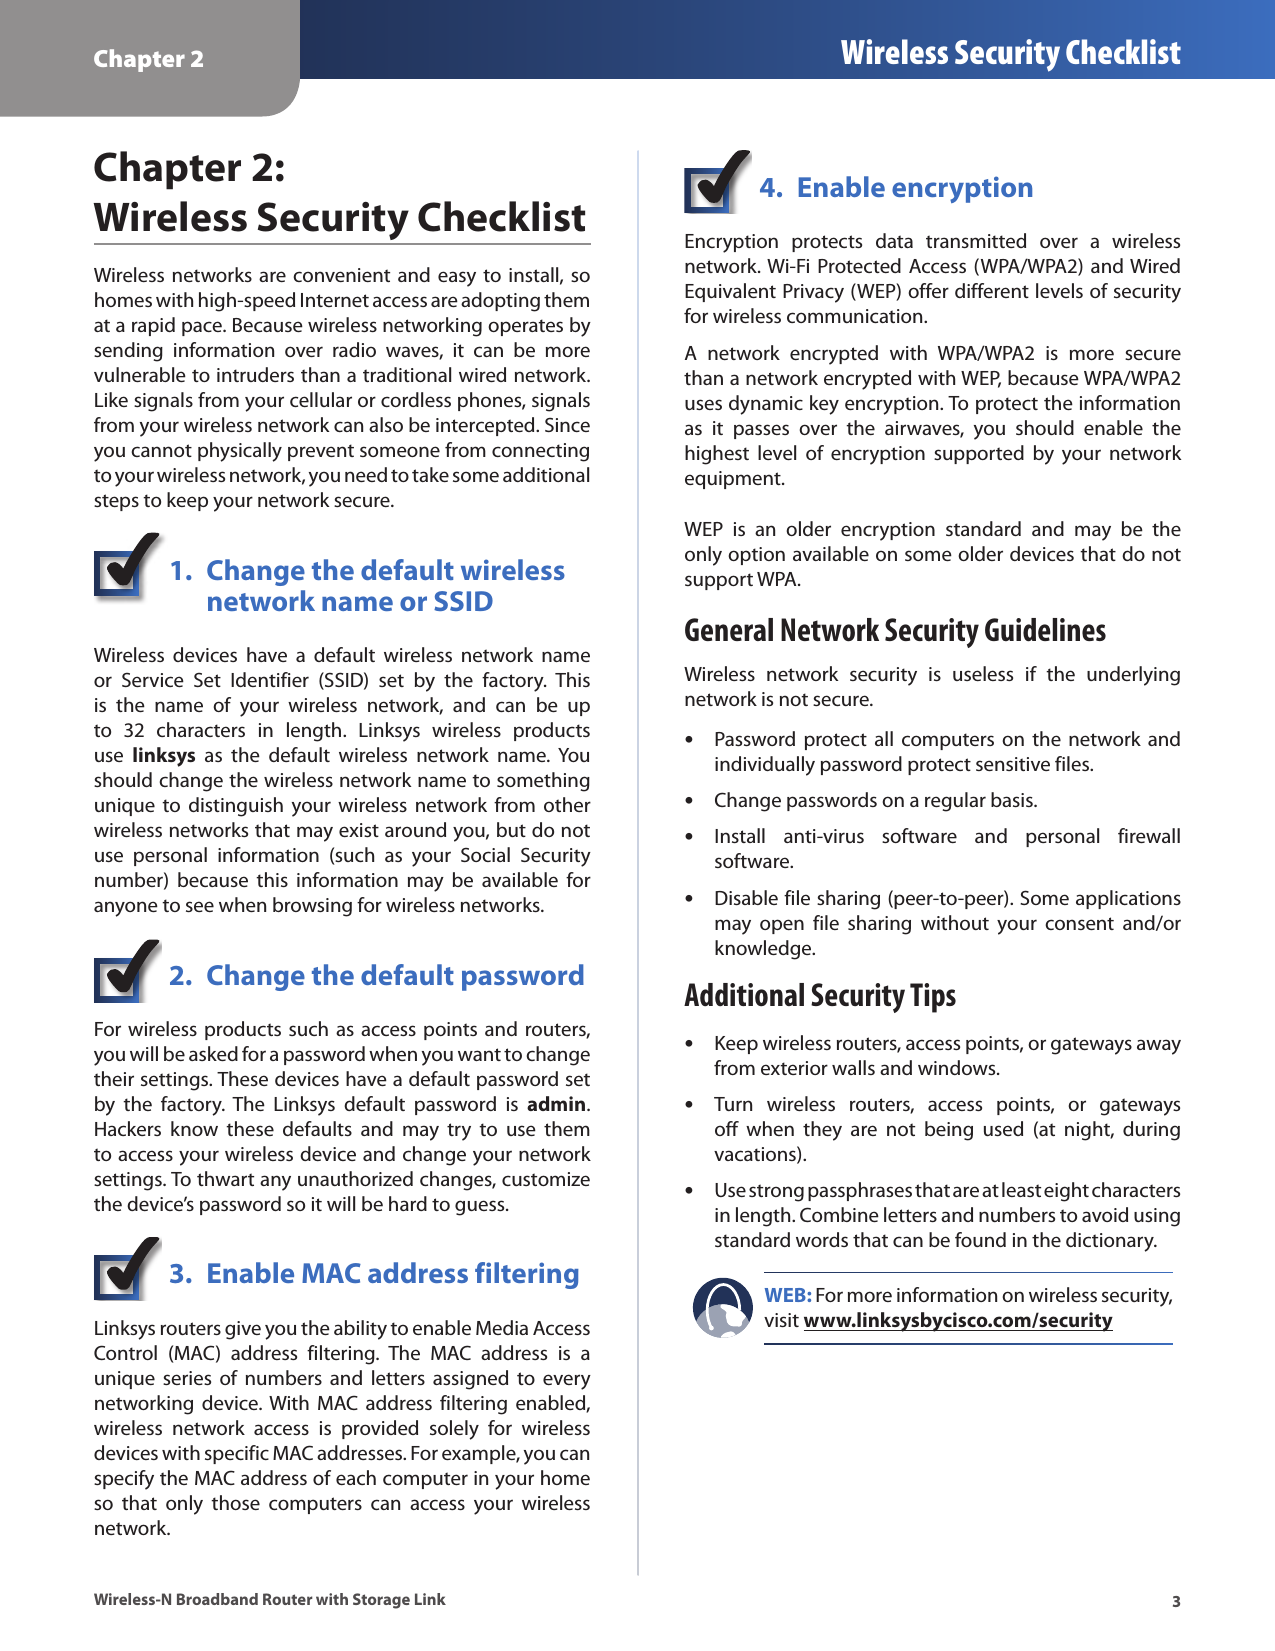 Chapter 2 Wireless Security Checklist3Wireless-N Broadband Router with Storage LinkChapter 2:  Wireless Security ChecklistWireless  networks are convenient  and  easy to install, so homes with high-speed Internet access are adopting them at a rapid pace. Because wireless networking operates by sending  information  over  radio  waves,  it  can  be  more vulnerable to intruders than a traditional wired network. Like signals from your cellular or cordless phones, signals from your wireless network can also be intercepted. Since you cannot physically prevent someone from connecting to your wireless network, you need to take some additional steps to keep your network secure. 1.  Change the default wireless    network name or SSIDWireless  devices  have  a  default  wireless  network  name or  Service  Set  Identifier  (SSID)  set  by  the  factory.  This is  the  name  of  your  wireless  network,  and  can  be  up to  32  characters  in  length.  Linksys  wireless  products use  linksys  as  the  default  wireless  network  name.  You should change the wireless network name to something unique  to distinguish  your wireless  network from  other wireless networks that may exist around you, but do not use  personal  information  (such  as  your  Social  Security number)  because  this  information  may  be  available  for anyone to see when browsing for wireless networks. 2.  Change the default passwordFor wireless products such as access points and routers, you will be asked for a password when you want to change their settings. These devices have a default password set by  the  factory.  The  Linksys  default  password  is  admin. Hackers  know  these  defaults  and  may  try  to  use  them to access your wireless device and change your network settings. To thwart any unauthorized changes, customize the device’s password so it will be hard to guess.3.  Enable MAC address filteringLinksys routers give you the ability to enable Media Access Control  (MAC)  address  filtering.  The  MAC  address  is  a unique  series  of  numbers  and  letters  assigned  to  every networking  device. With  MAC  address filtering  enabled, wireless  network  access  is  provided  solely  for  wireless devices with specific MAC addresses. For example, you can specify the MAC address of each computer in your home so  that  only  those  computers  can  access  your  wireless network. 4.  Enable encryptionEncryption  protects  data  transmitted  over  a  wireless network. Wi-Fi Protected  Access (WPA/WPA2) and Wired Equivalent Privacy (WEP) offer different levels of security for wireless communication.A  network  encrypted  with  WPA/WPA2  is  more  secure than a network encrypted with WEP, because WPA/WPA2 uses dynamic key encryption. To protect the information as  it  passes  over  the  airwaves,  you  should  enable  the highest  level  of  encryption  supported  by  your  network equipment. WEP  is  an  older  encryption  standard  and  may  be  the only option available on some older devices that do not support WPA.General Network Security GuidelinesWireless  network  security  is  useless  if  the  underlying network is not secure. Password protect  all computers on  the network  and  •individually password protect sensitive files.Change passwords on a regular basis. •Install  anti-virus  software  and  personal  firewall  •software.Disable file sharing (peer-to-peer). Some applications  •may  open  file  sharing  without  your  consent  and/or knowledge.Additional Security TipsKeep wireless routers, access points, or gateways away  •from exterior walls and windows.Turn  wireless  routers,  access  points,  or  gateways  •off  when  they  are  not  being  used  (at  night,  during vacations).Use strong passphrases that are at least eight characters  •in length. Combine letters and numbers to avoid using standard words that can be found in the dictionary. WEB: For more information on wireless security, visit www.linksysbycisco.com/security